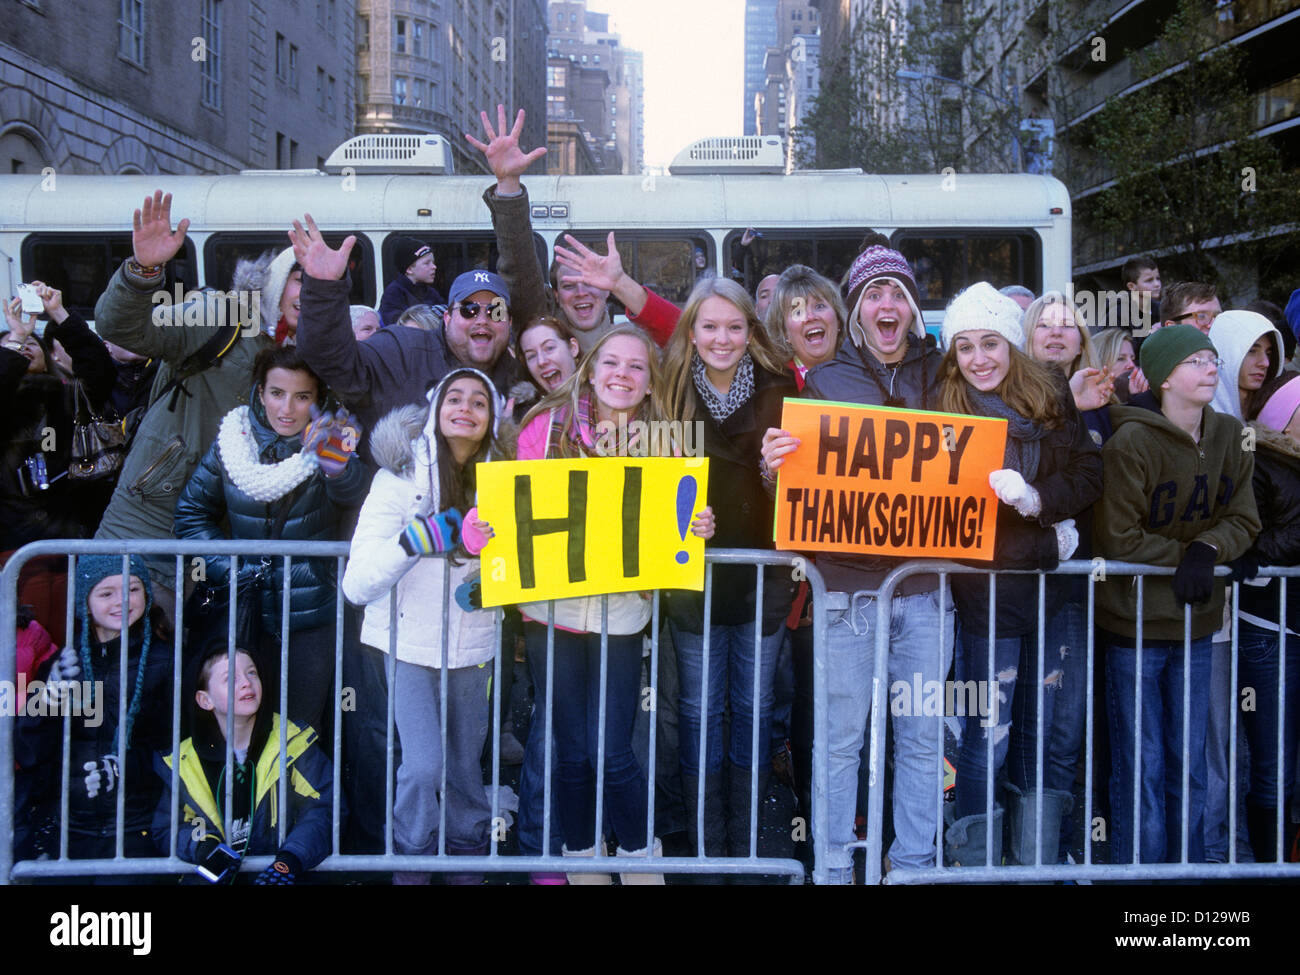 Thanksgiving Parade New York. Hi greeting card. Friendly crowd of young people watching and waving on the street. Macy's Thanksgiving Day Parade USA Stock Photo